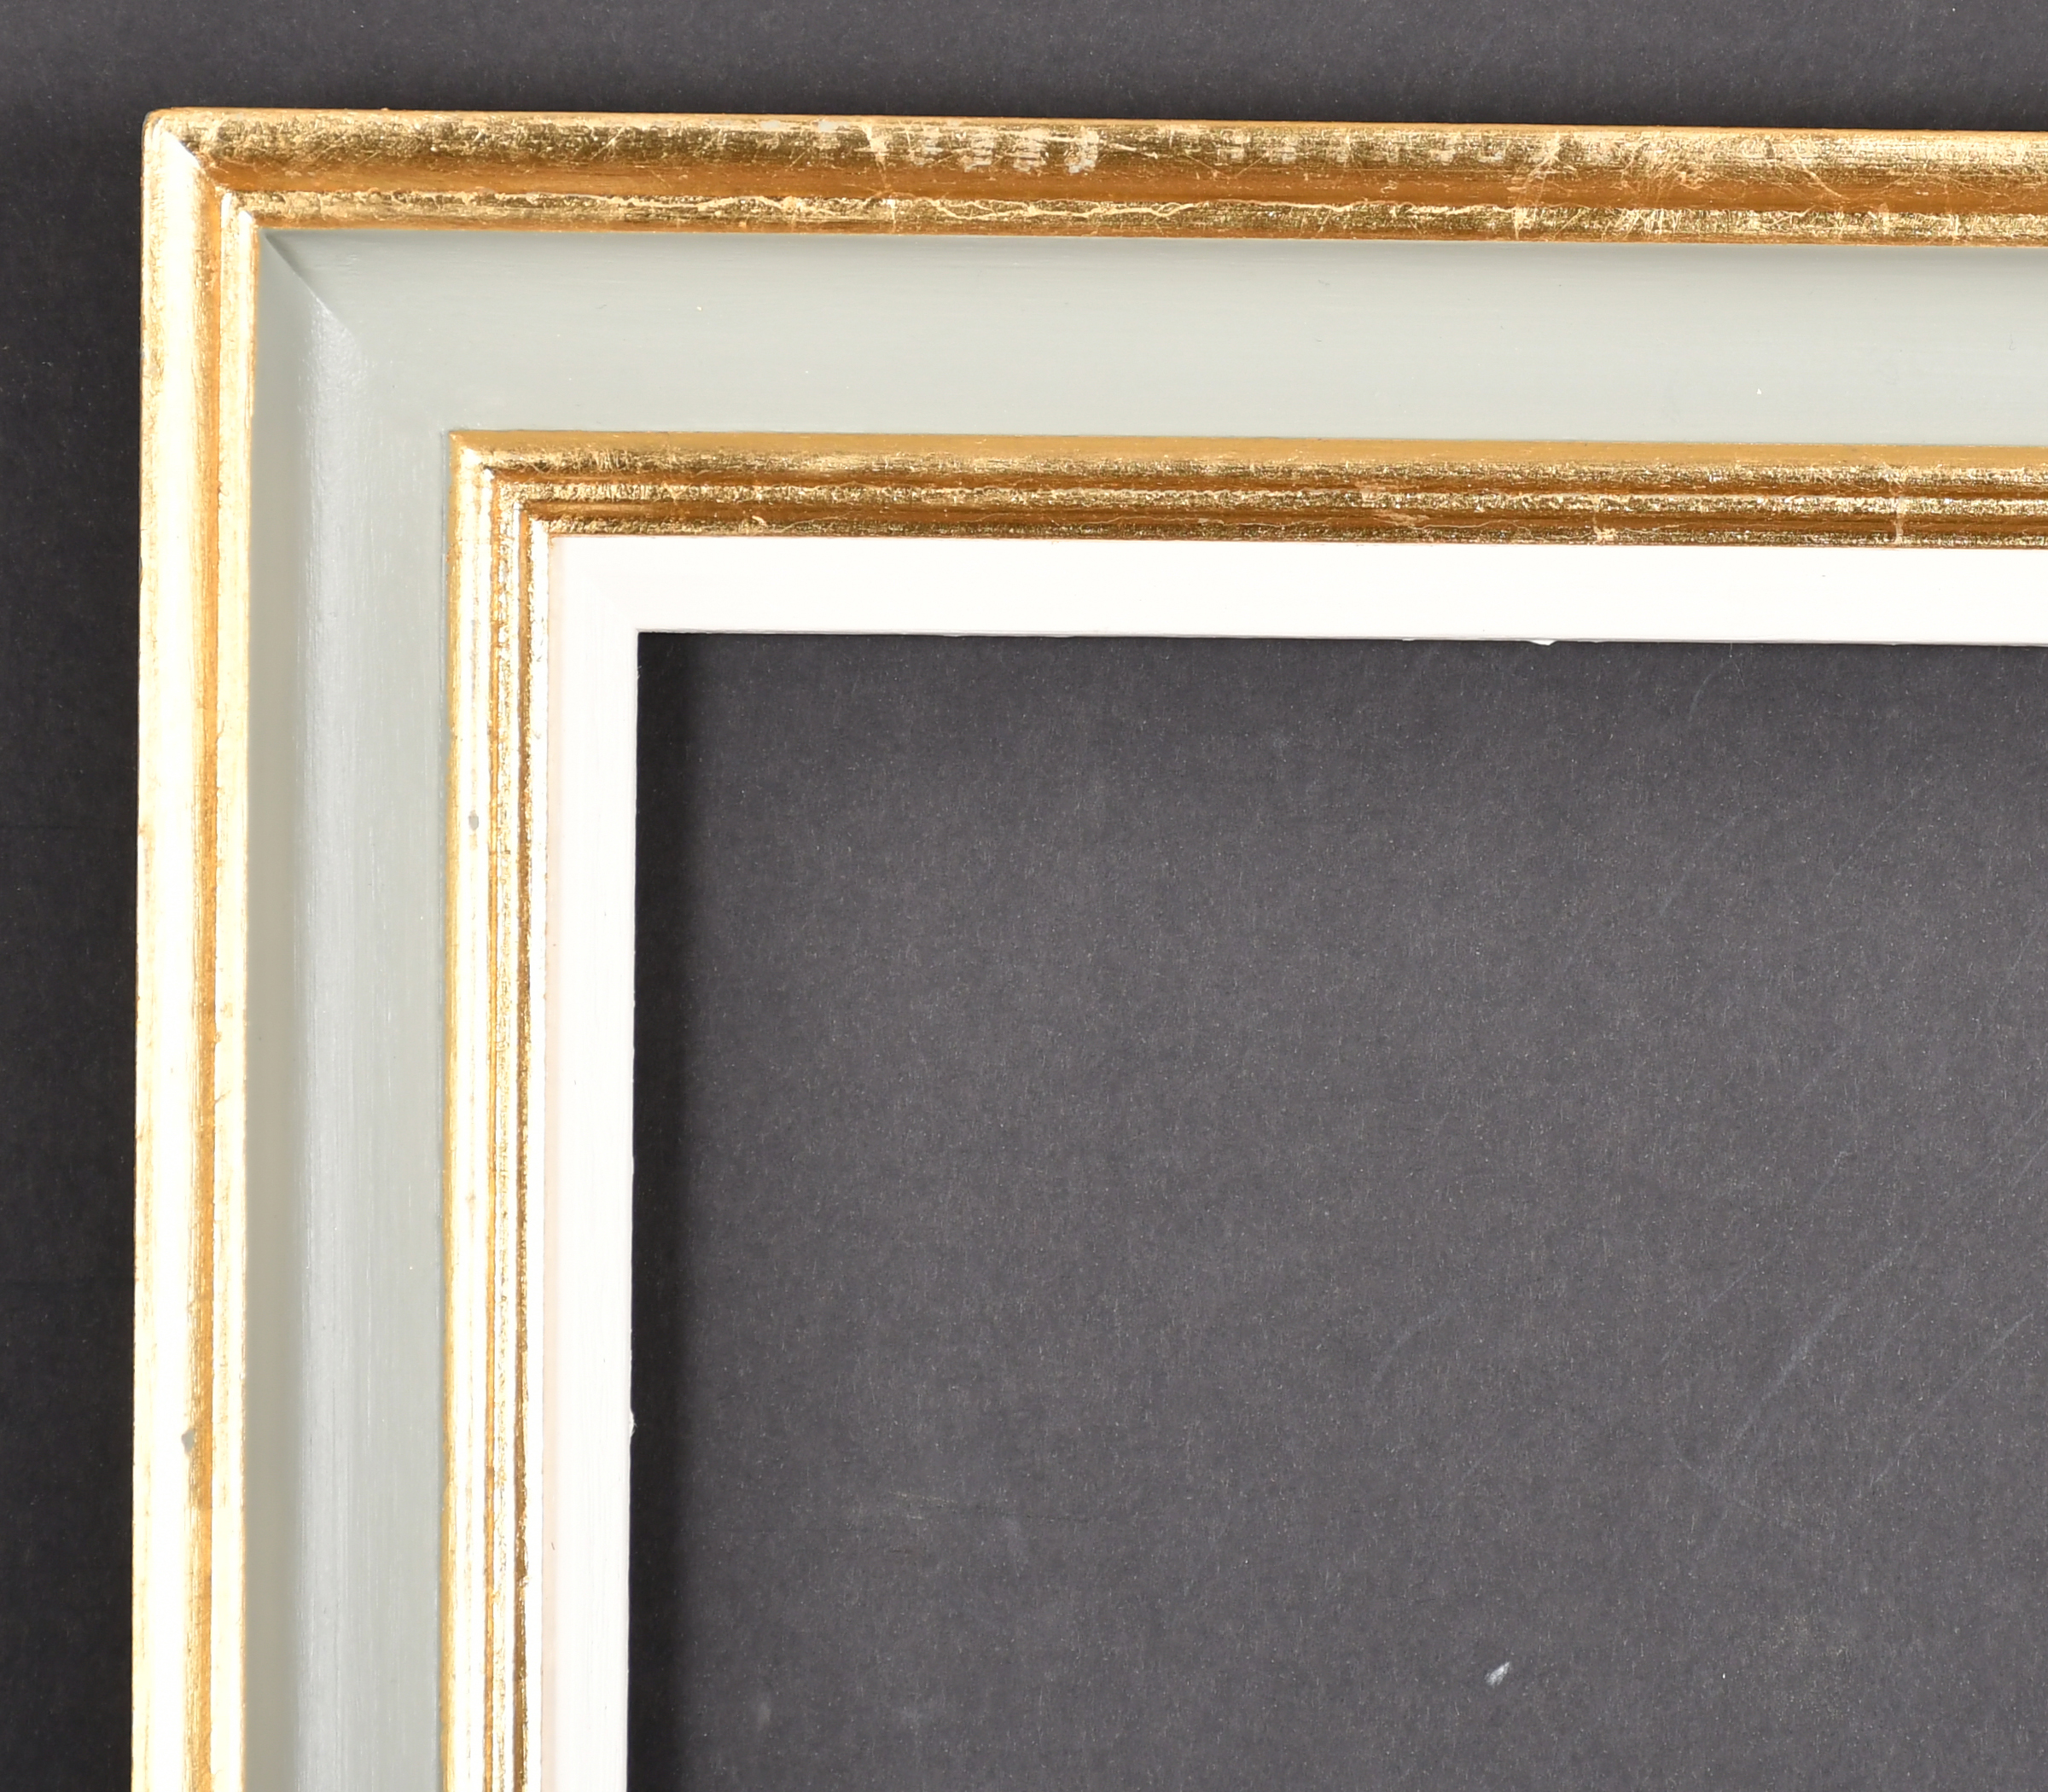 20th-21st Century English School. A Painted Frame with gilt inner and outer edges and a white